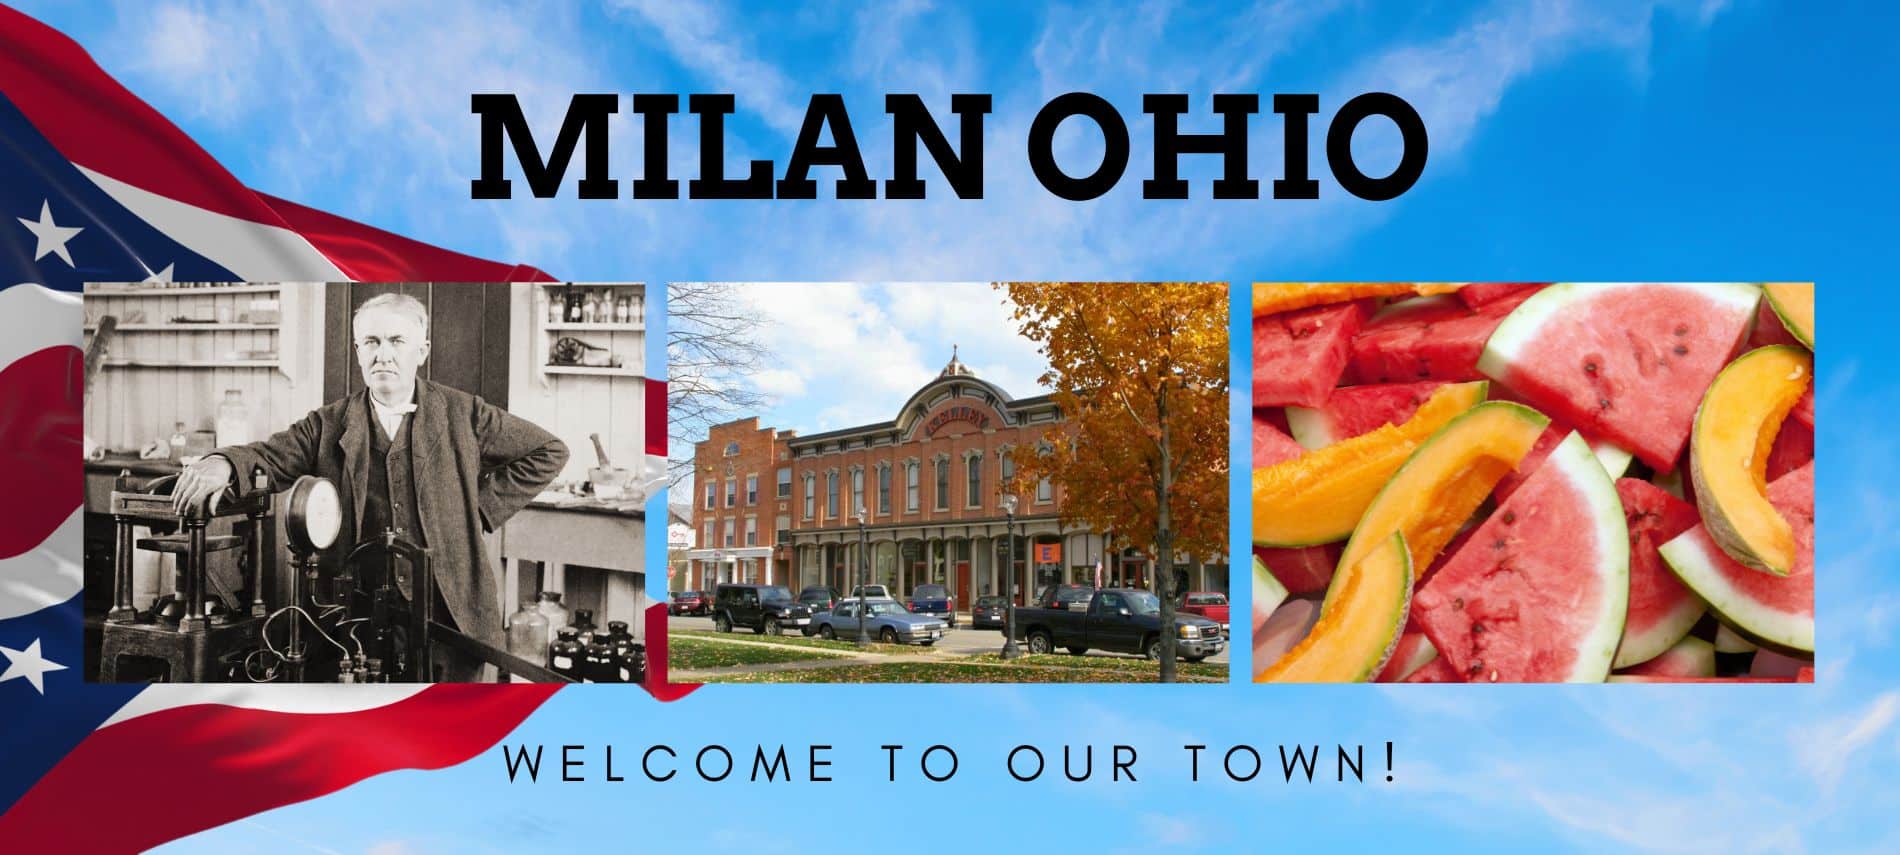 Milan Ohio - Welcome to Our Town - collage of Melon festival, Thomas Edison and town square on blue sky and Ohio flag background.